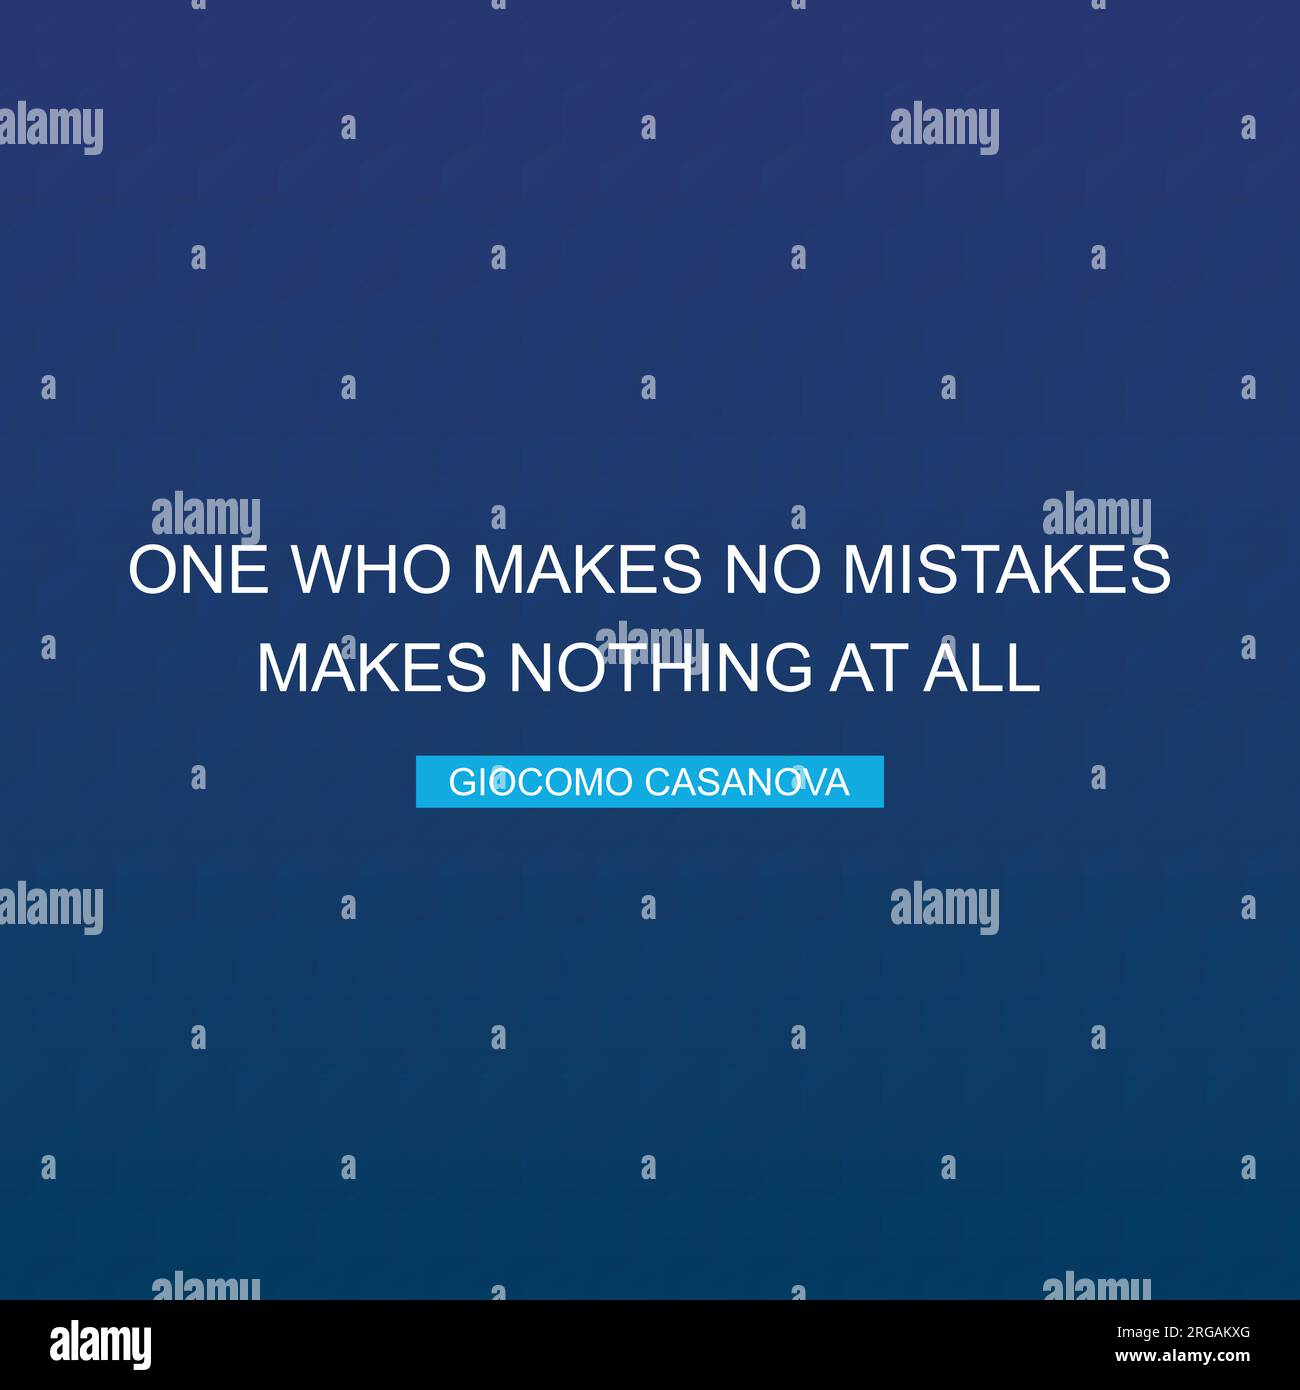 One who makes no mistakes makes nothing at all banner. Stock Vector